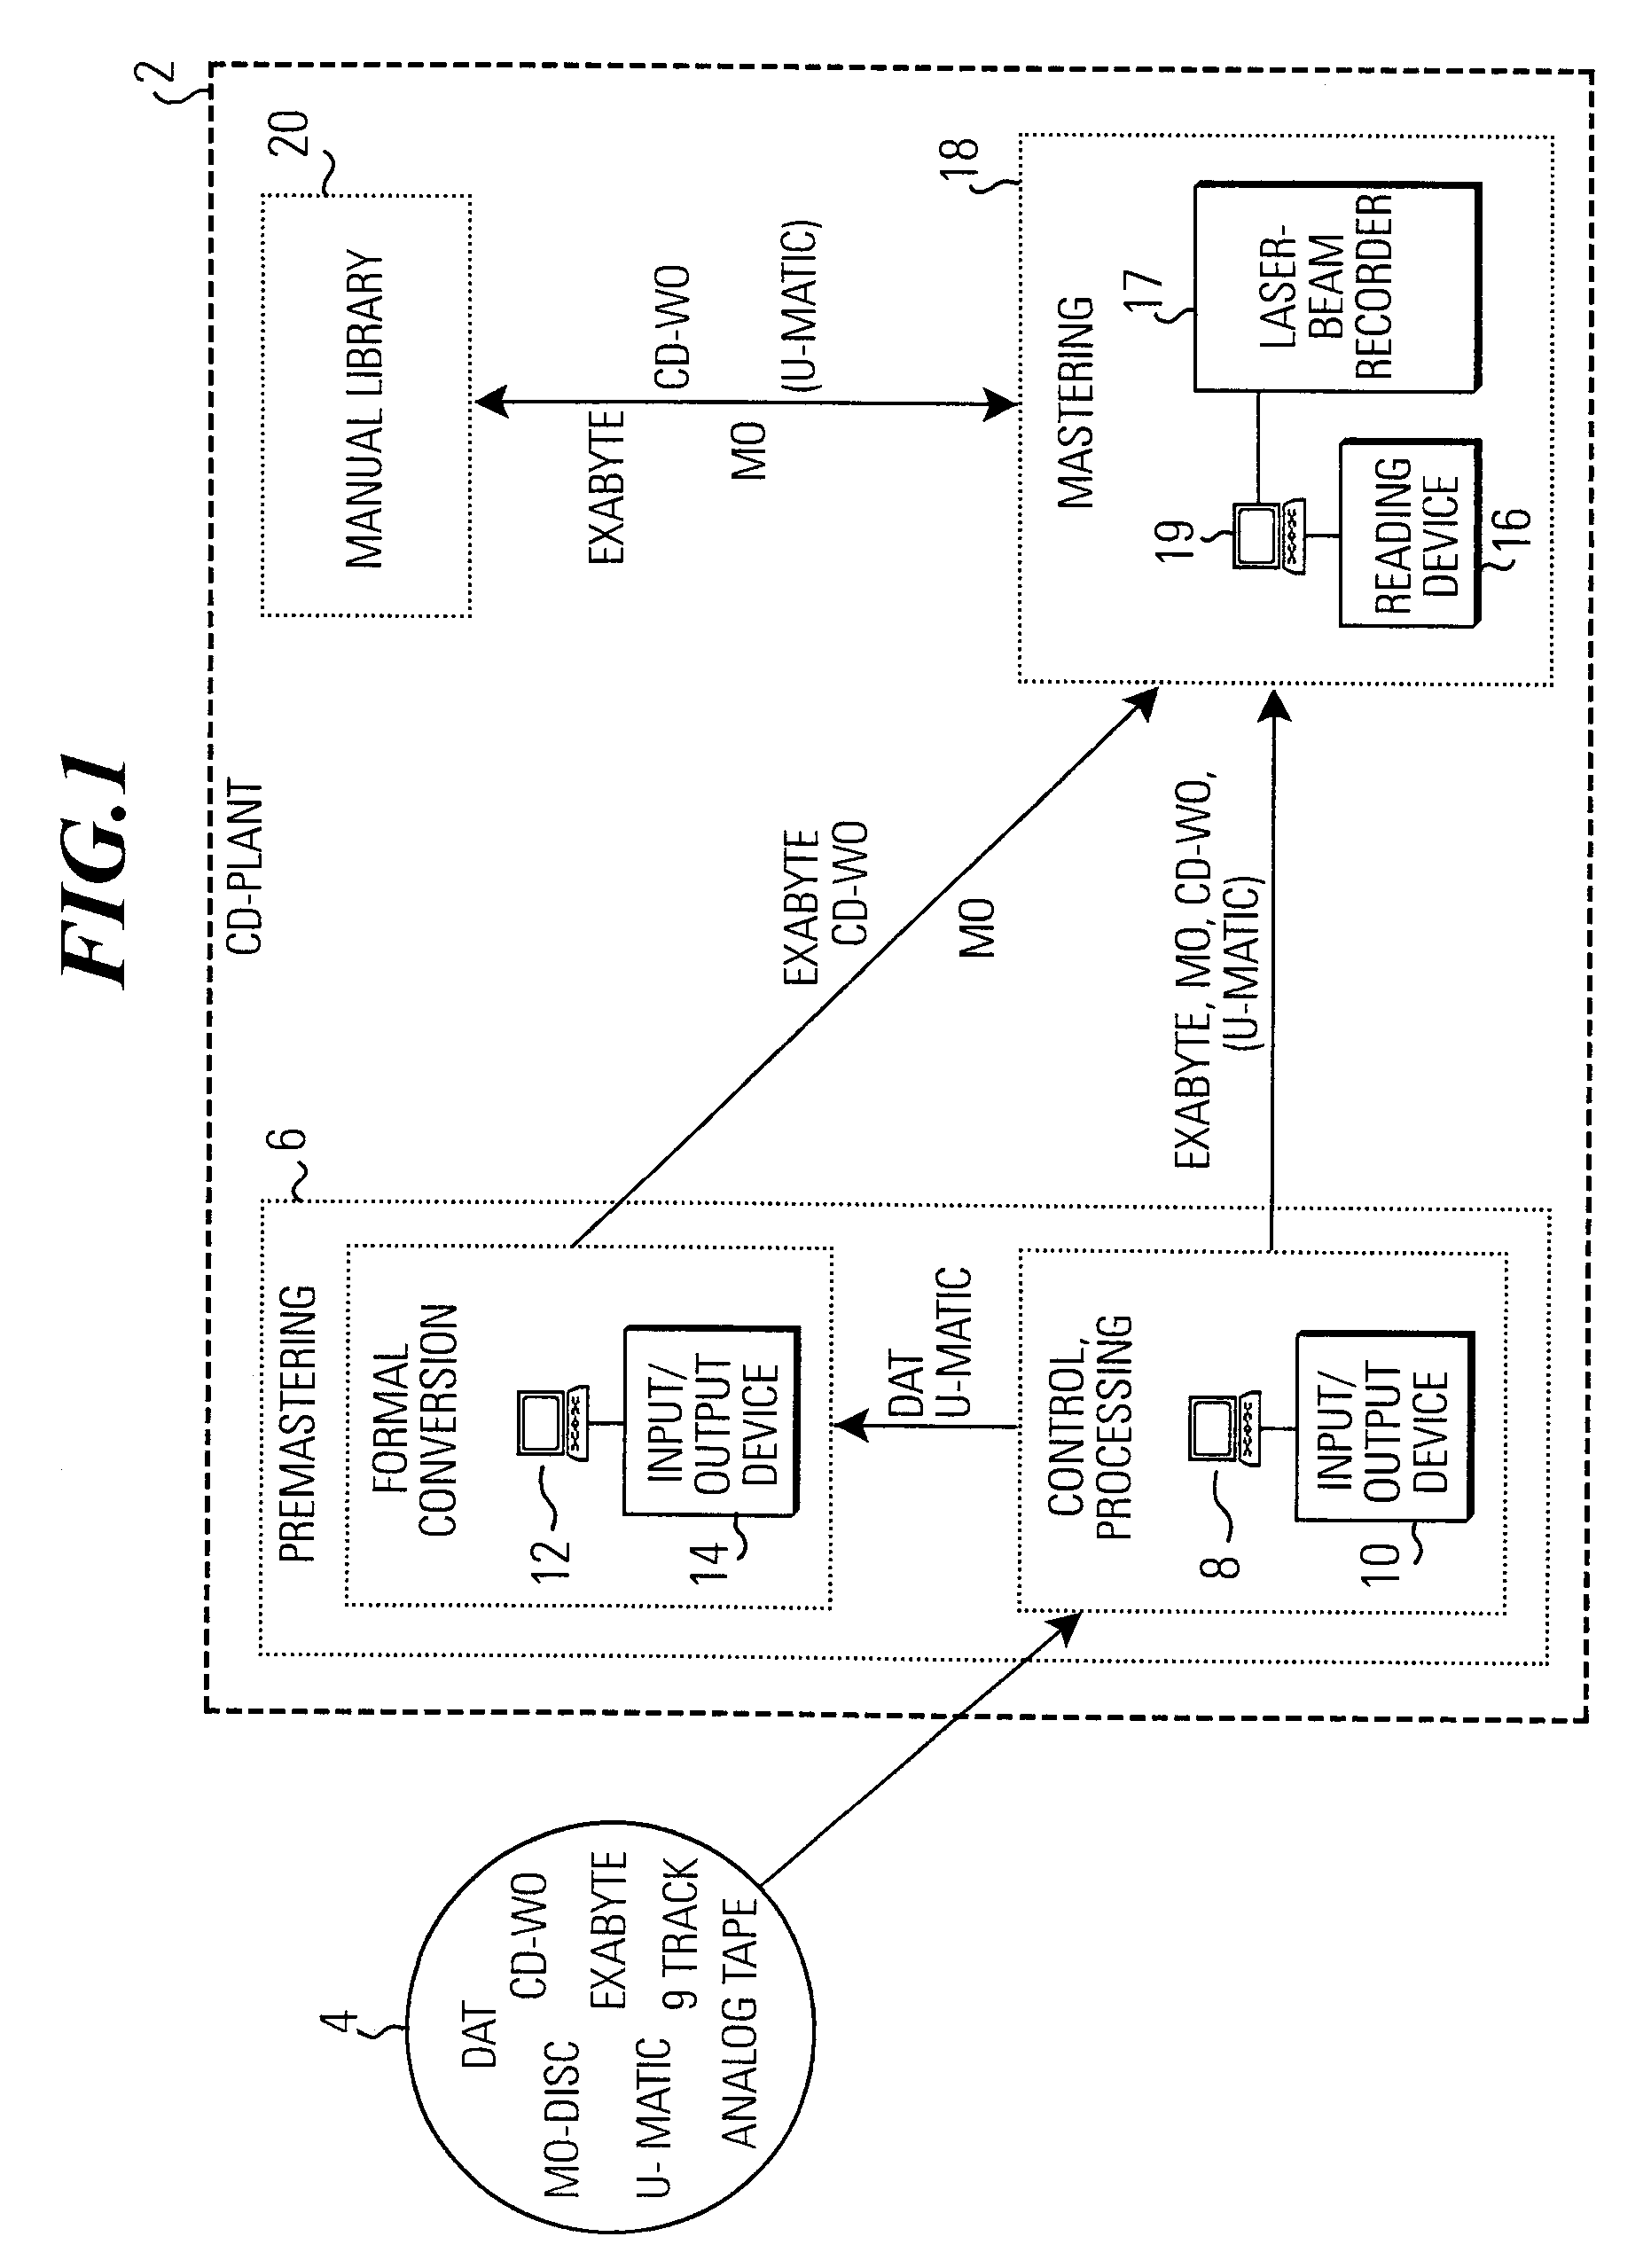 System and method for recording digital data on glass master recording disks